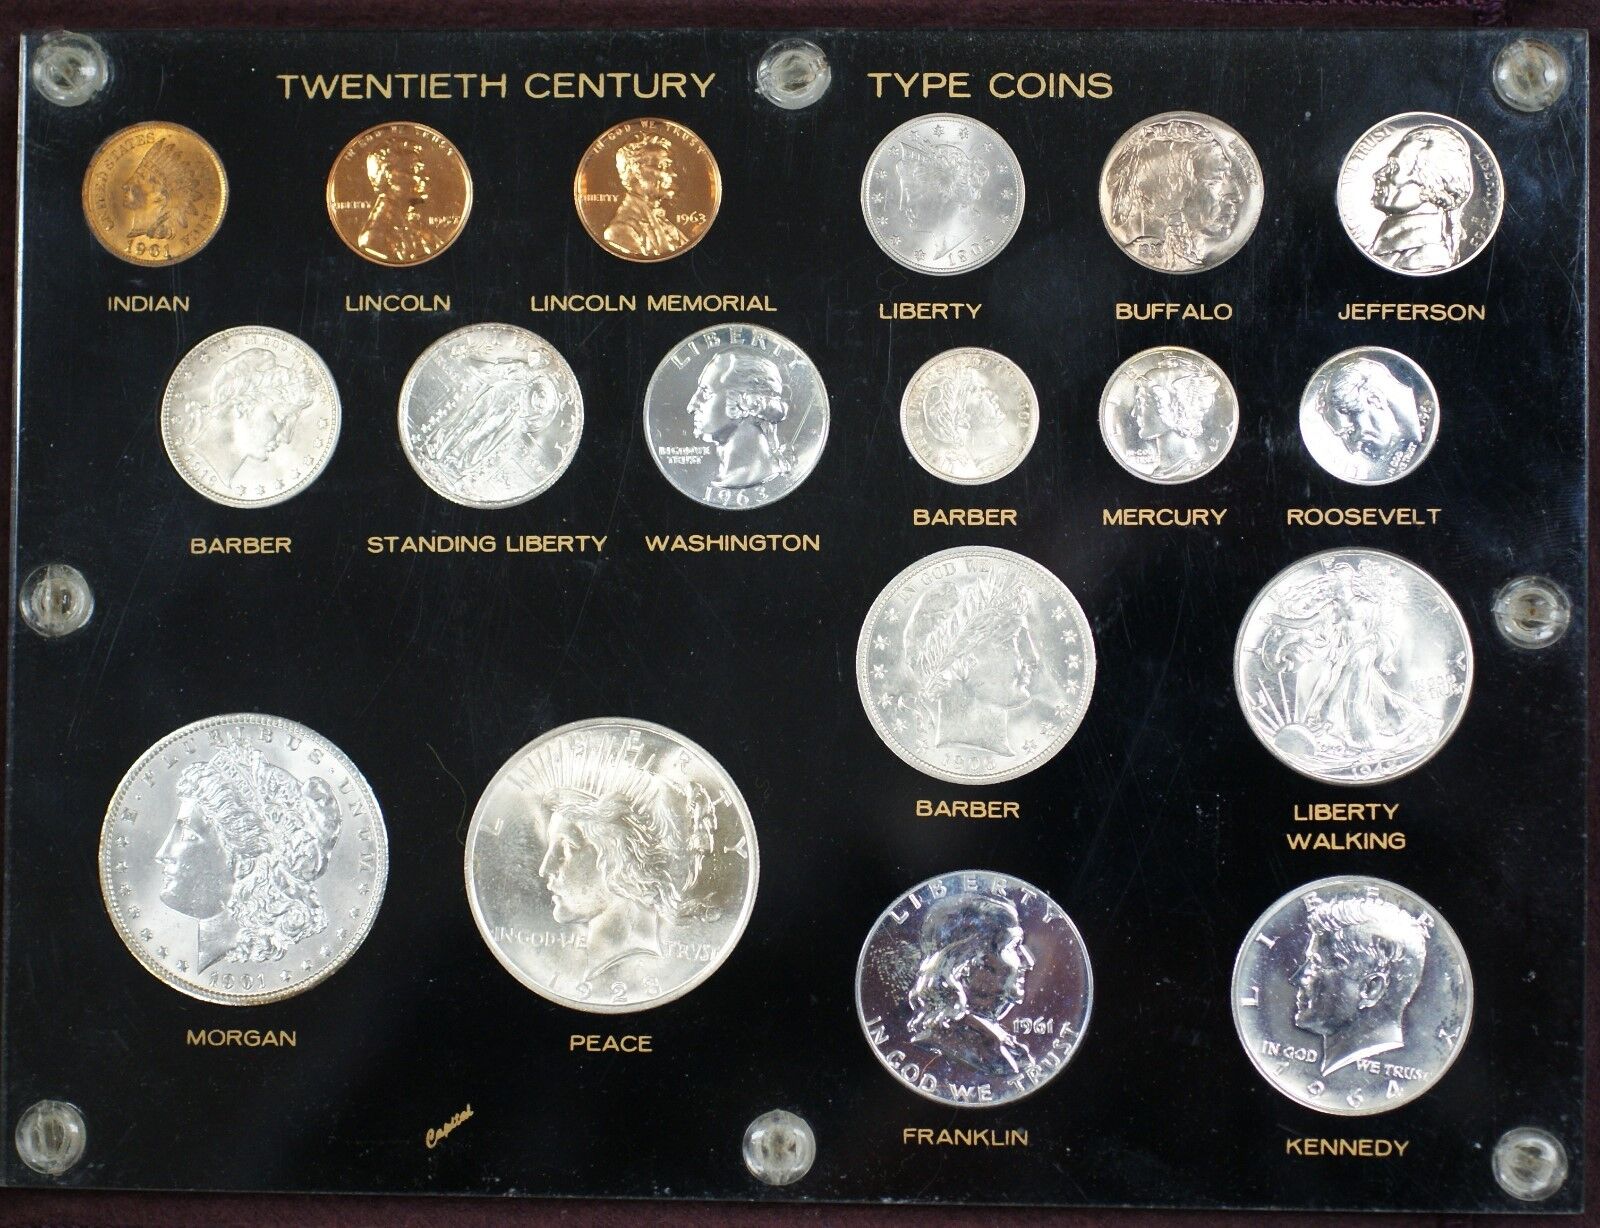 MintProducts > OTHER > Complete U.S. Coin Sets